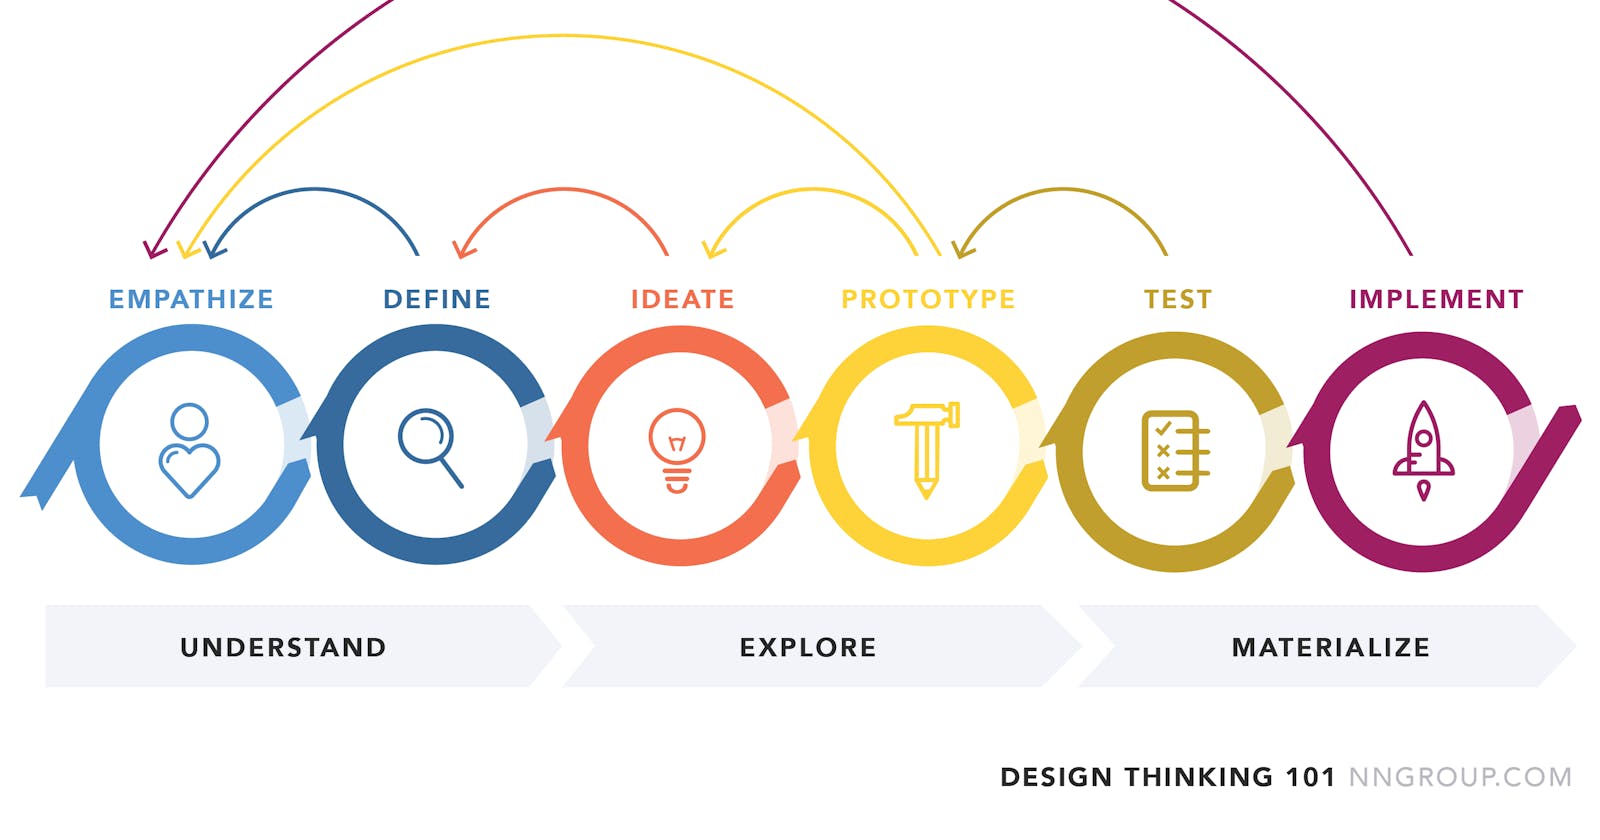 Day 5/100 in #100DaysOfDesign: Power of Design Thinking - My Top 10 Tools